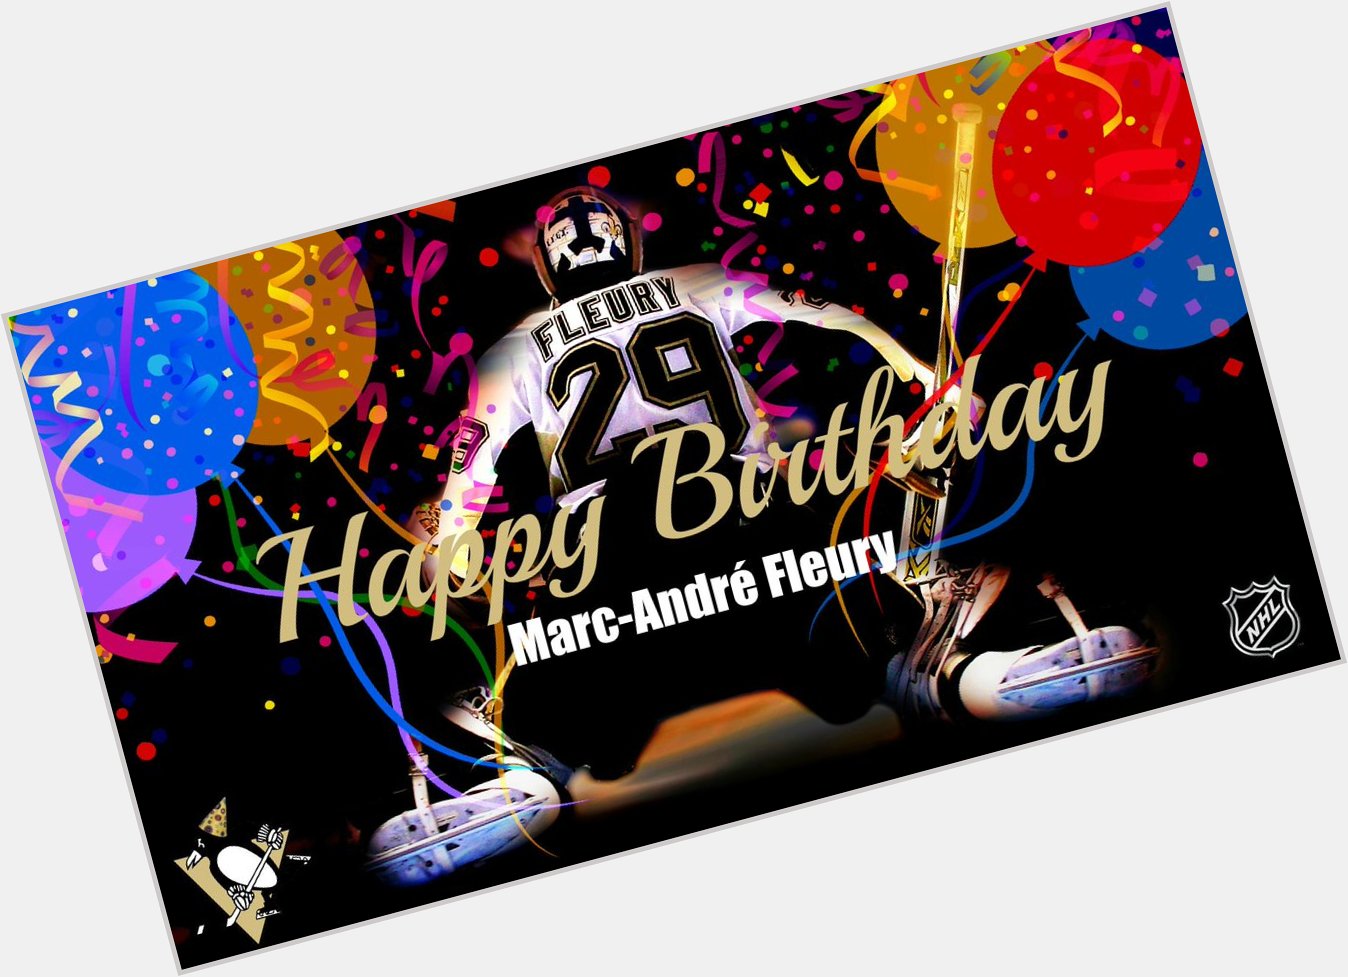 Wishing Penguins Marc-André Fleury a Happy 30th BDay! Heres to another year of living your dreams;Cheers! 